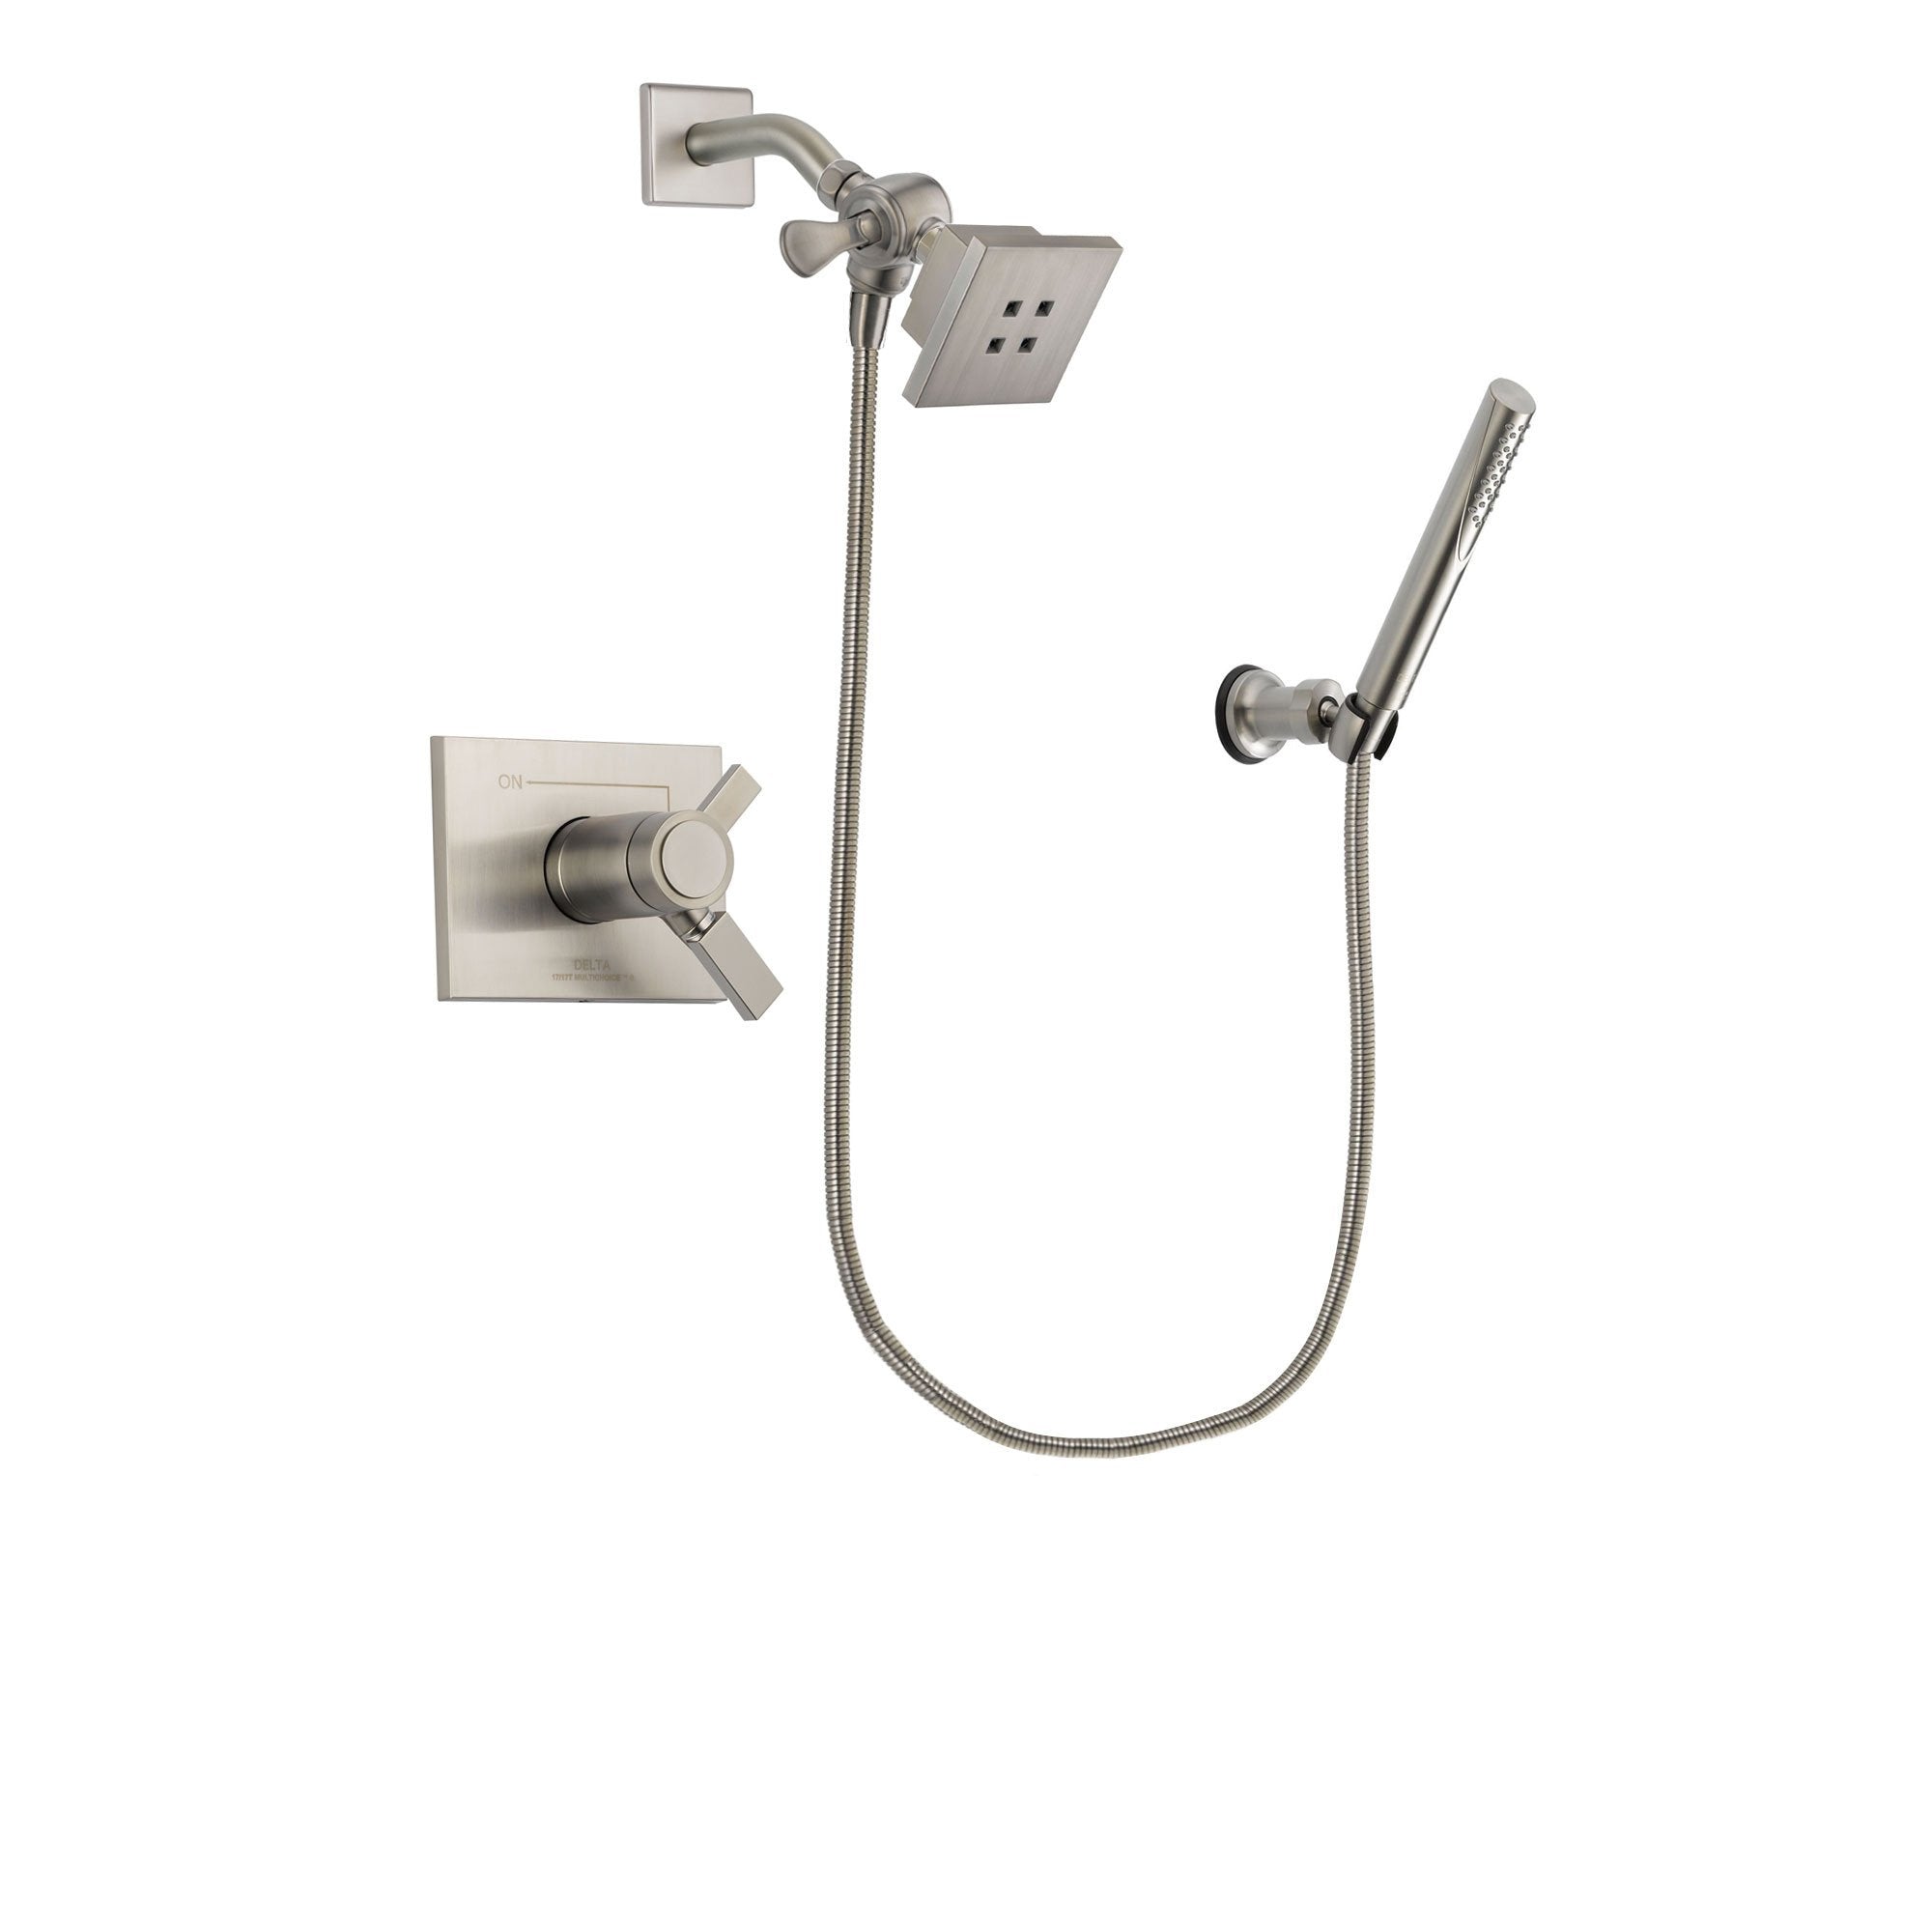 Delta Vero Stainless Steel Finish Thermostatic Shower Faucet System Package with Square Showerhead and Modern Handheld Shower Spray Includes Rough-in Valve DSP2114V